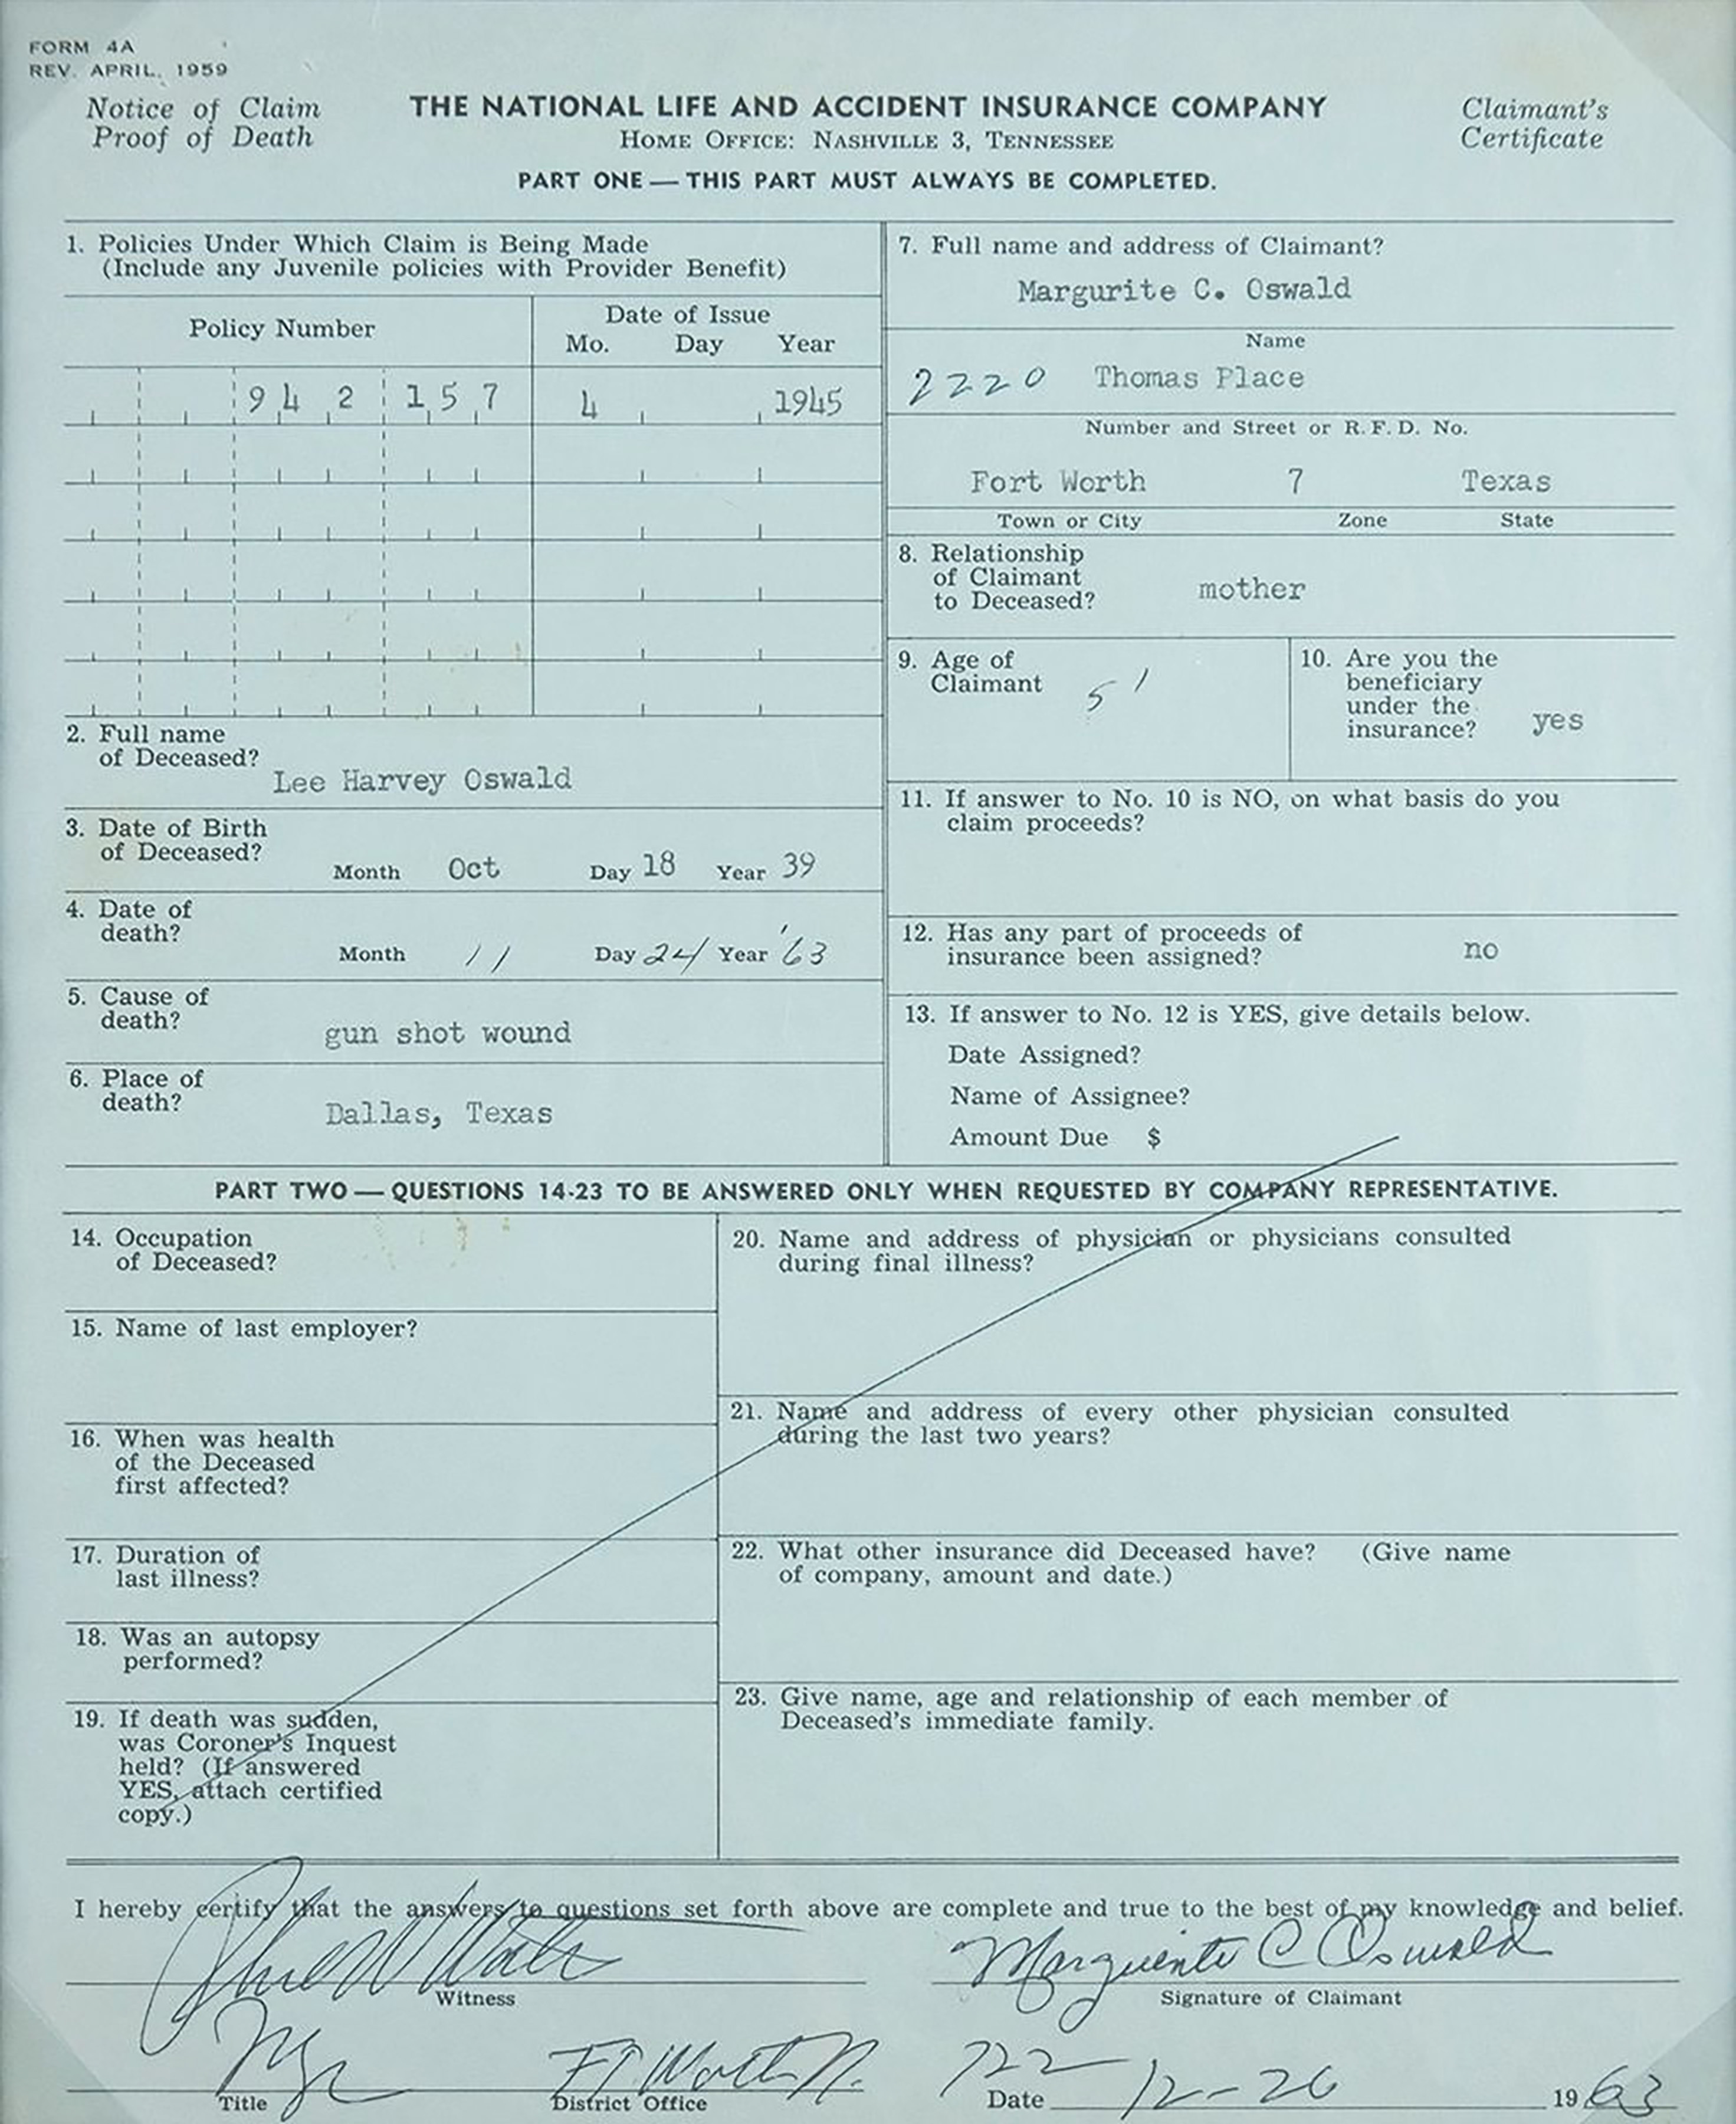 The Notice of Insurance Claim for Lee Harvey Oswald